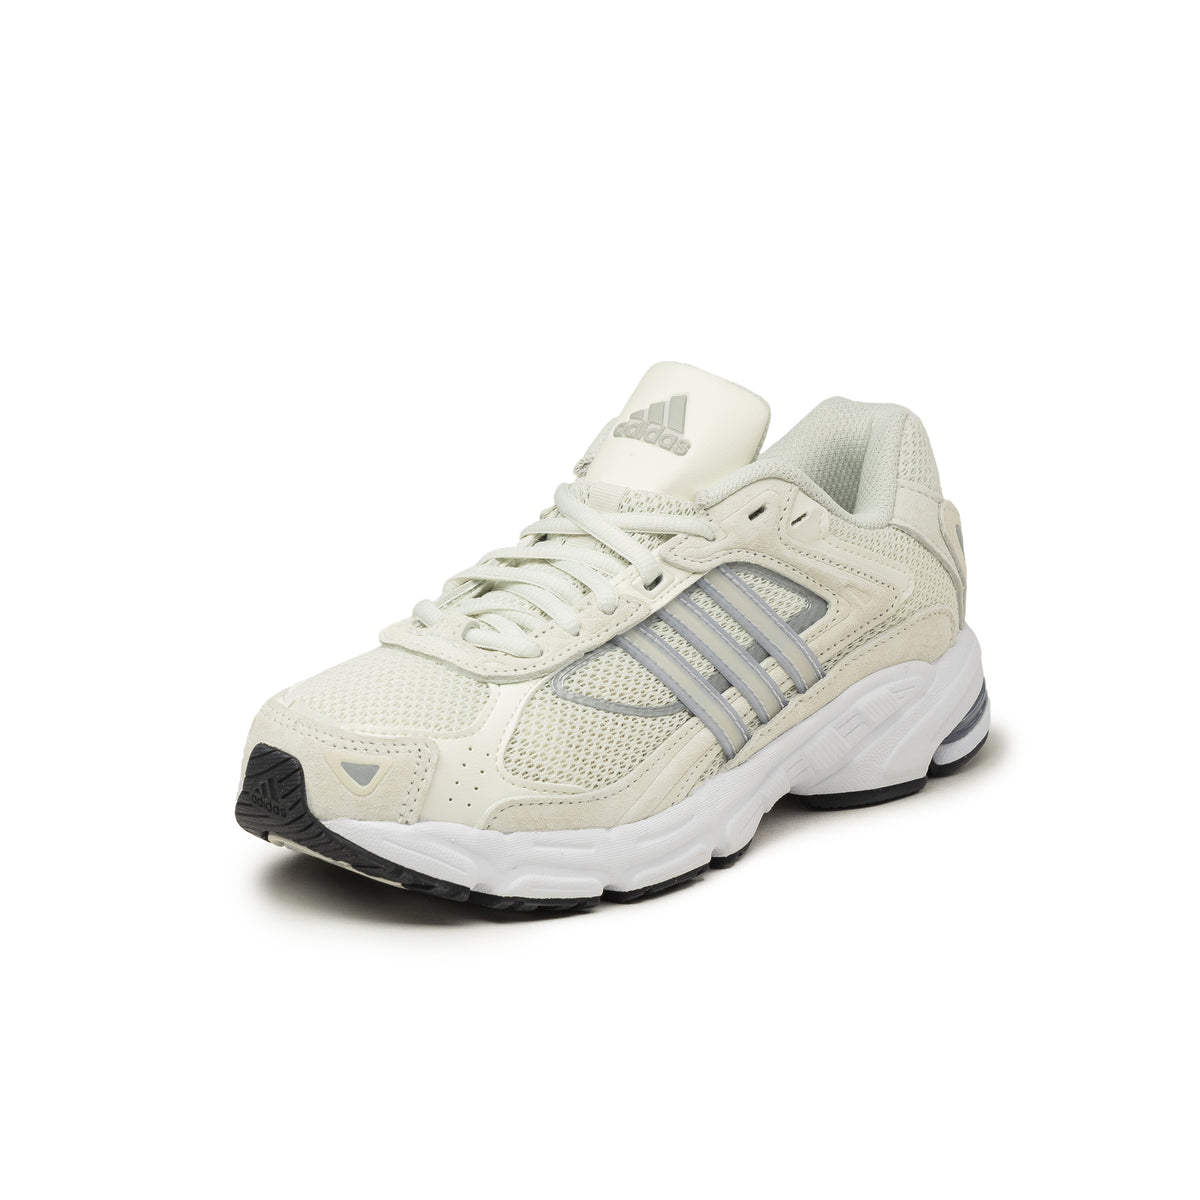 Adidas Response CL W – buy now at Asphaltgold Online Store!